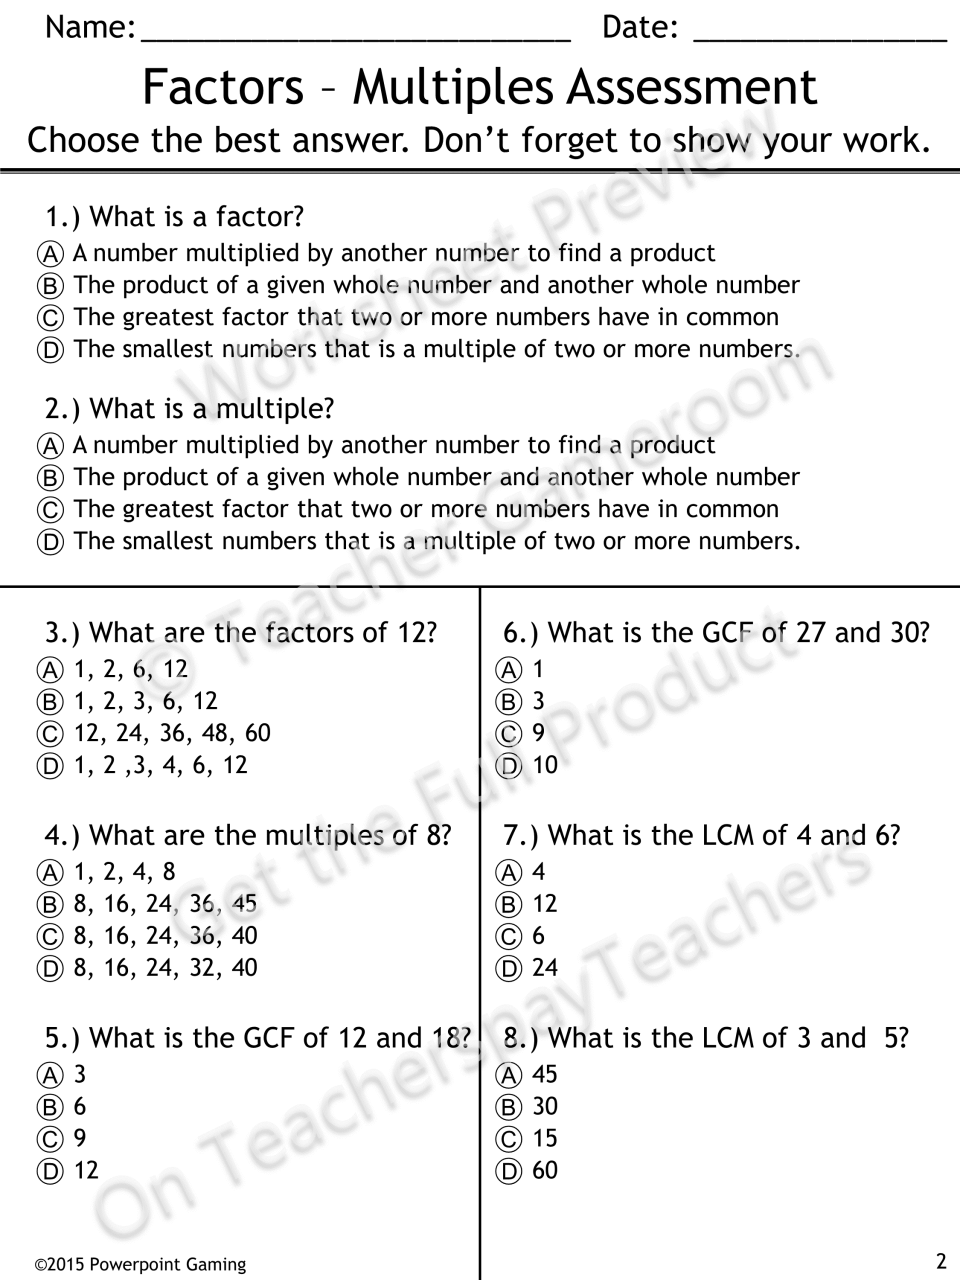 This quiz reviews multiples, factors, Least Common Multiple (LCM), and